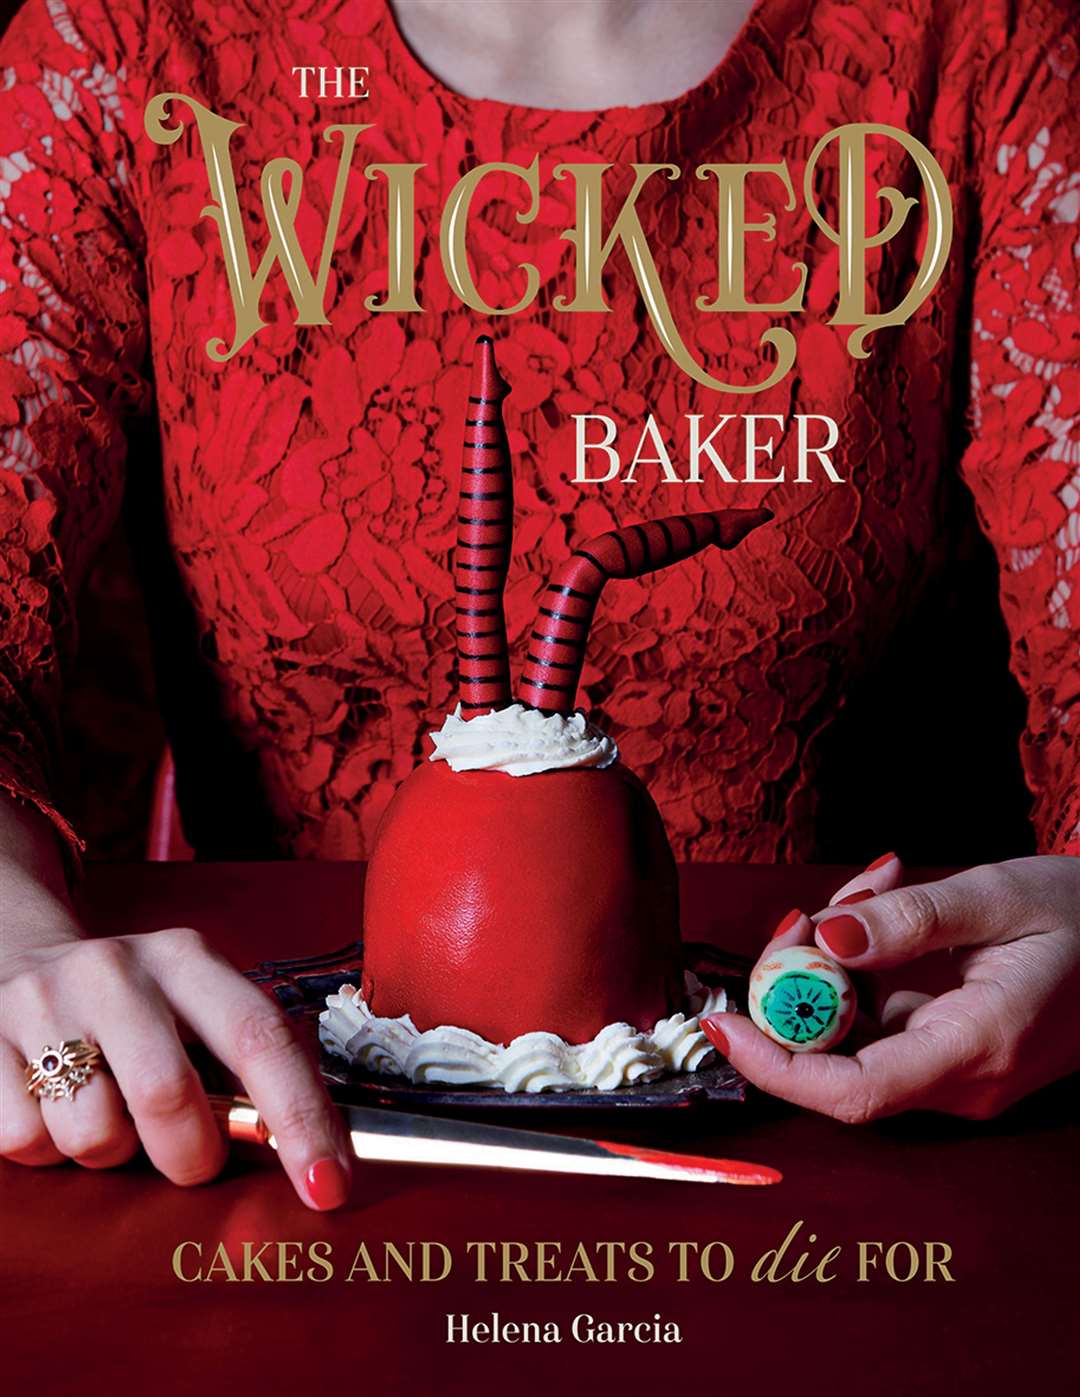 The Wicked Baker by Helena Garcia. Picture: Patricia Niven/Quadrille/PA